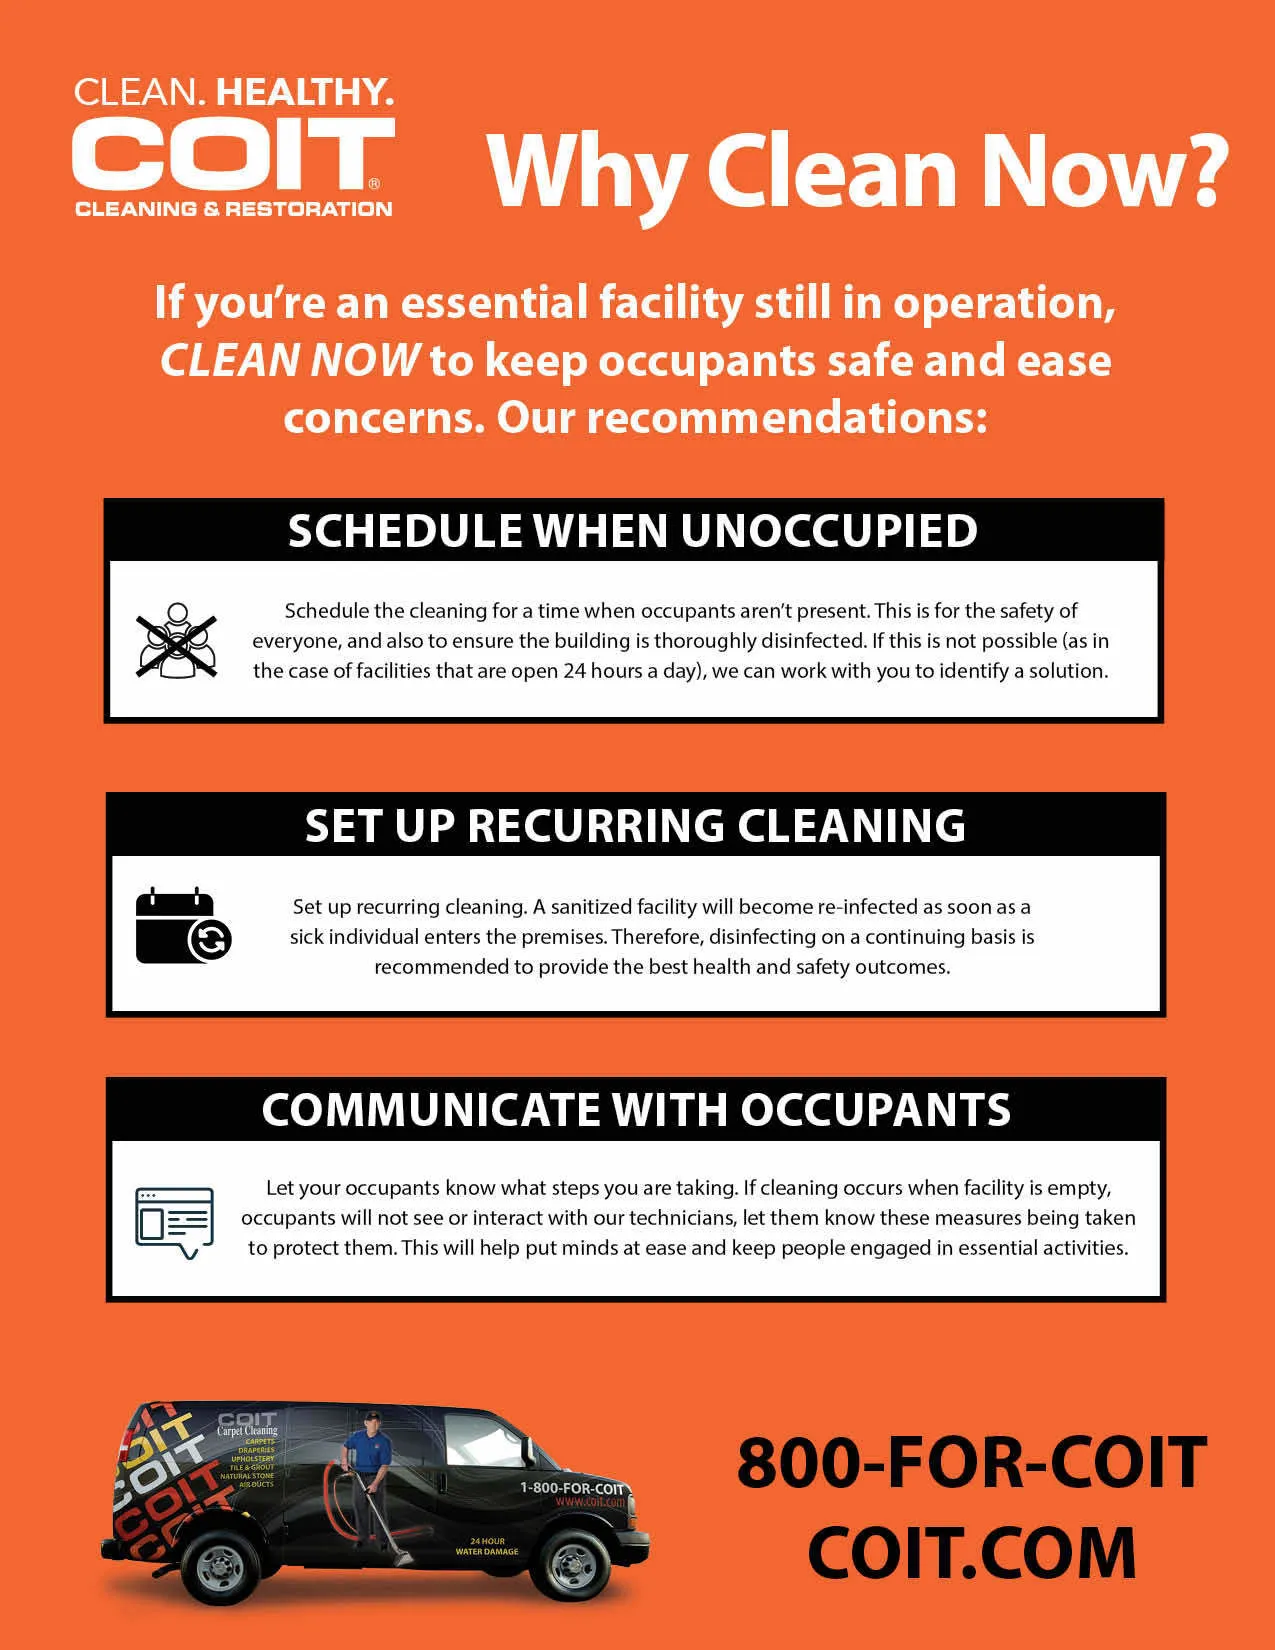 COIT Why Clean Now Infographic2_0